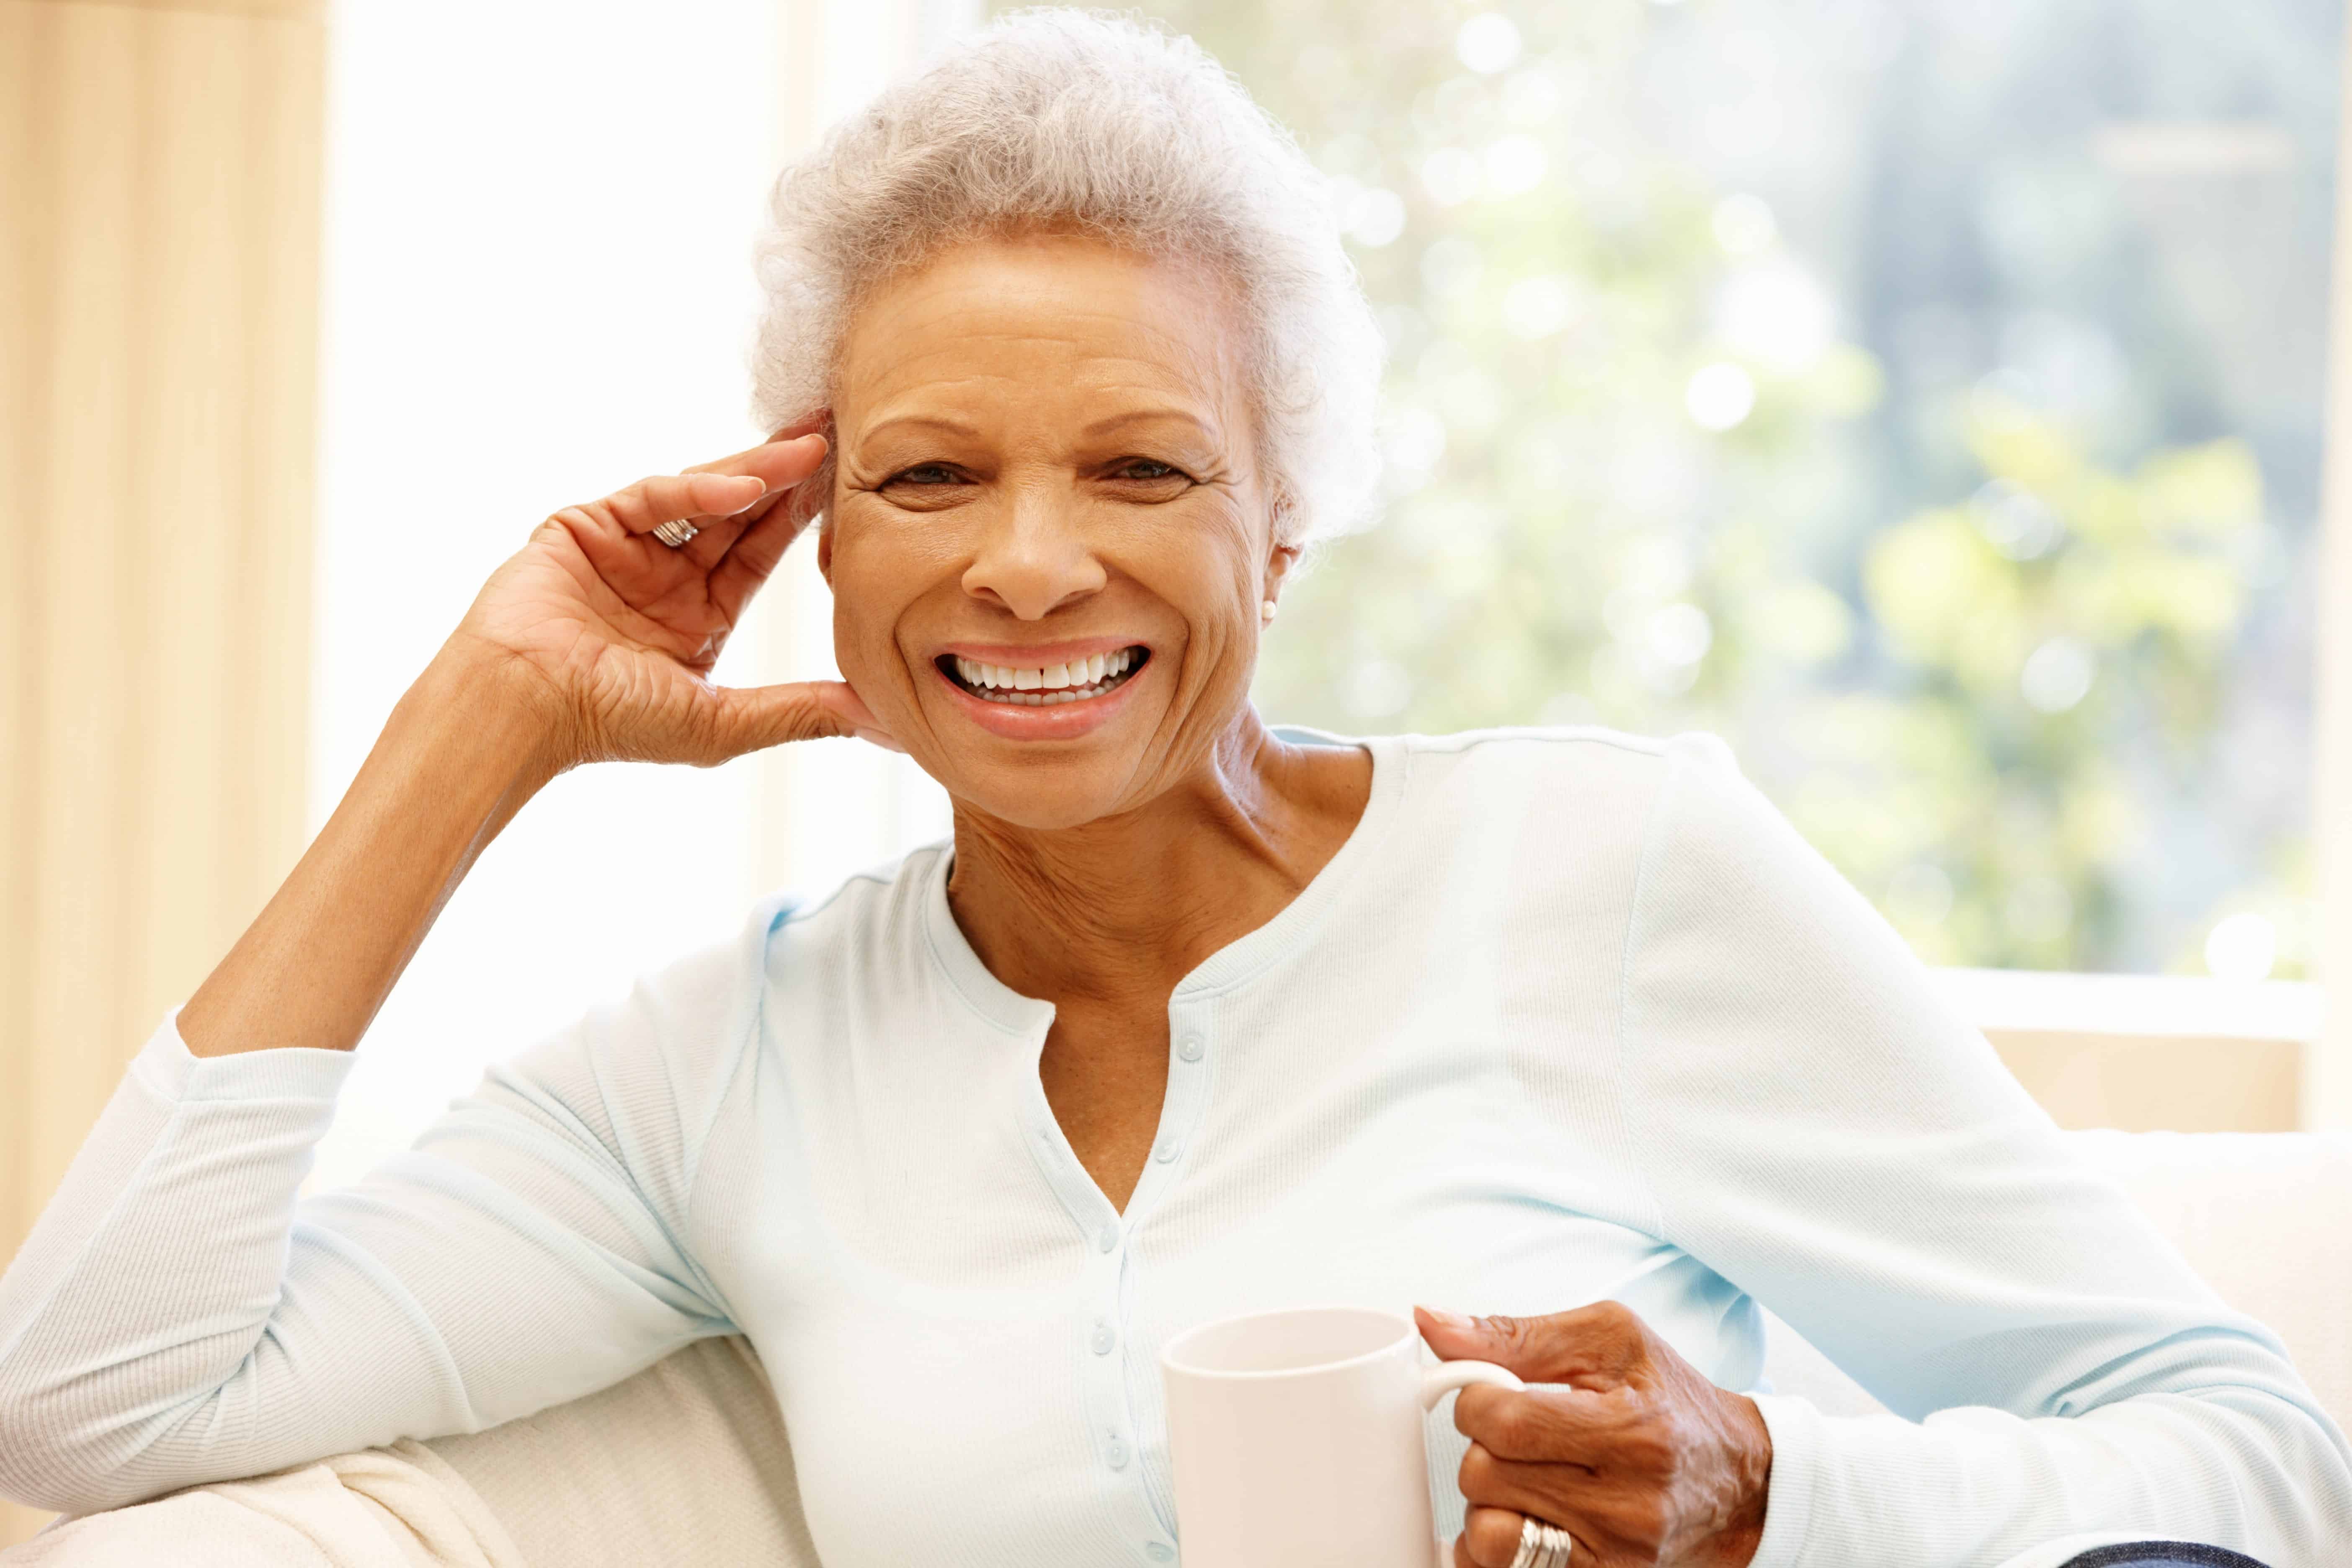 Portrait of smiling senior woman in front of window